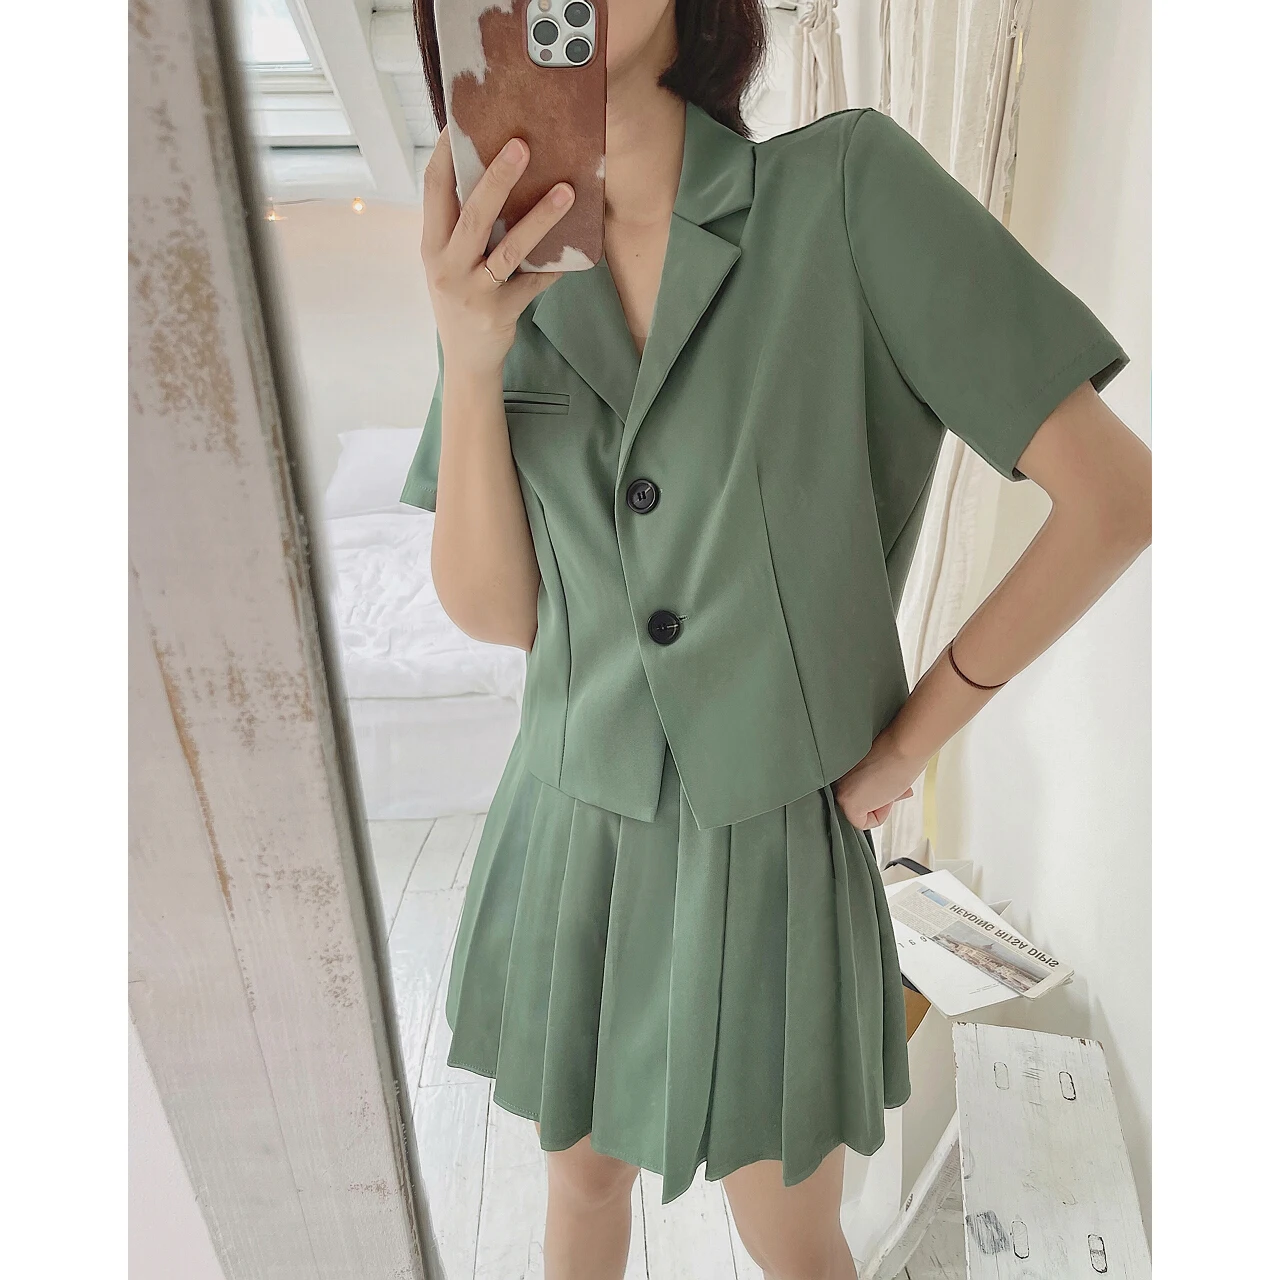 2022 New Woman Set 2 Pieces Tracksuit Suit Y2k Clothes Crop Top Pleated Skirt Short Sleeve Jacket Shorts Summer Outfit Urban Oem